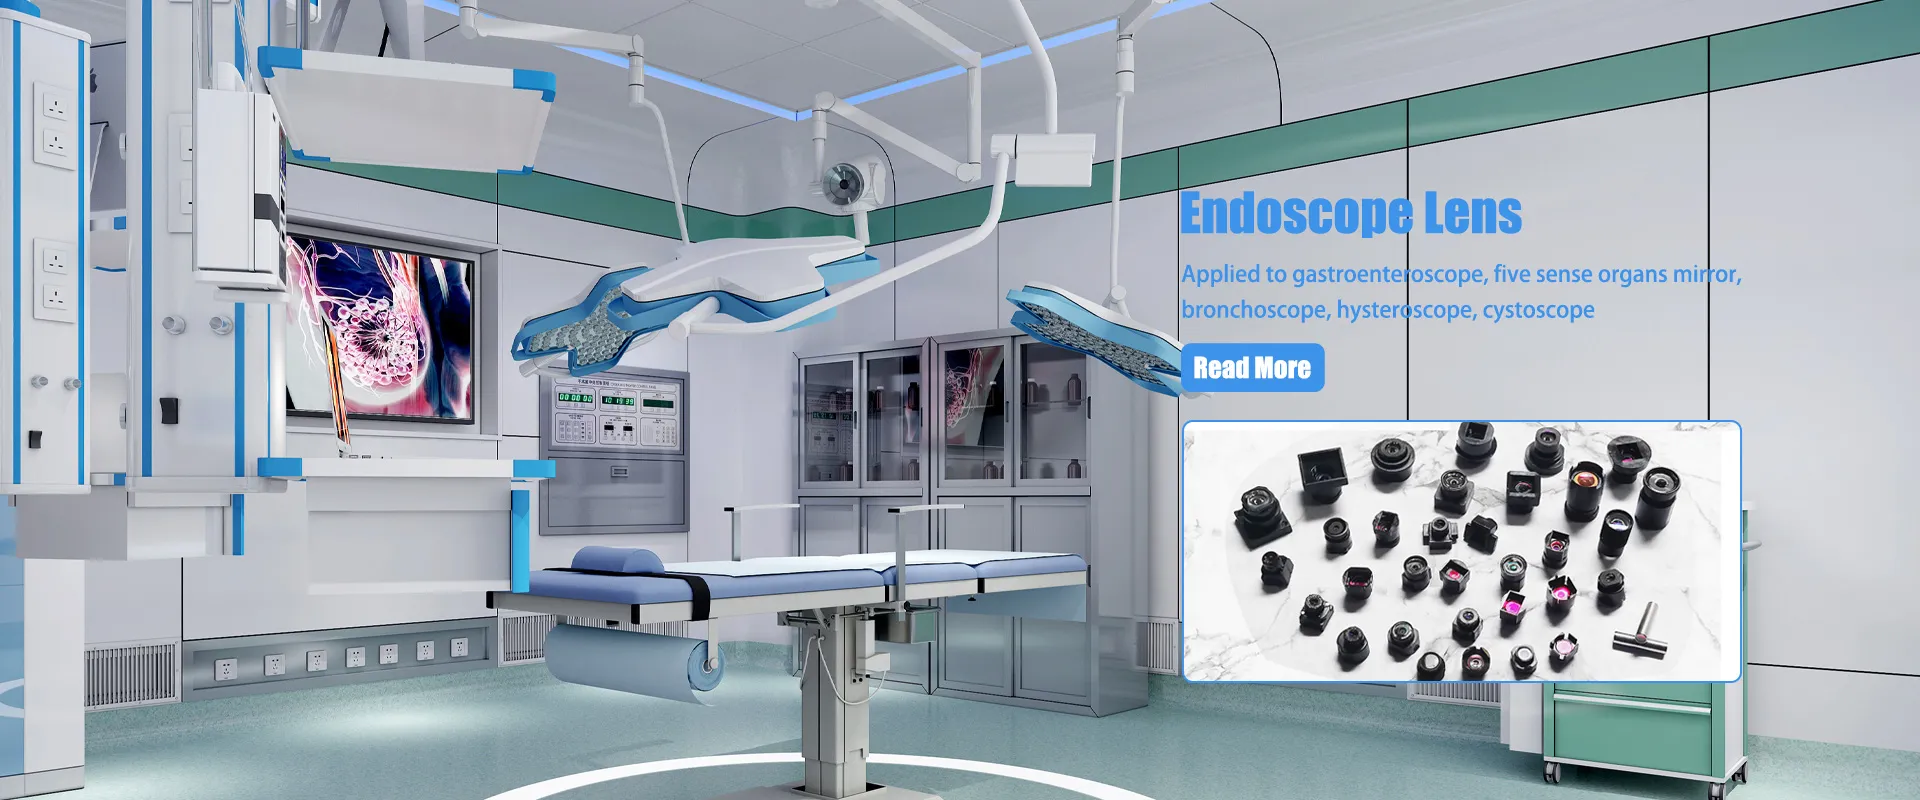 Endoscope Lens Suppliers